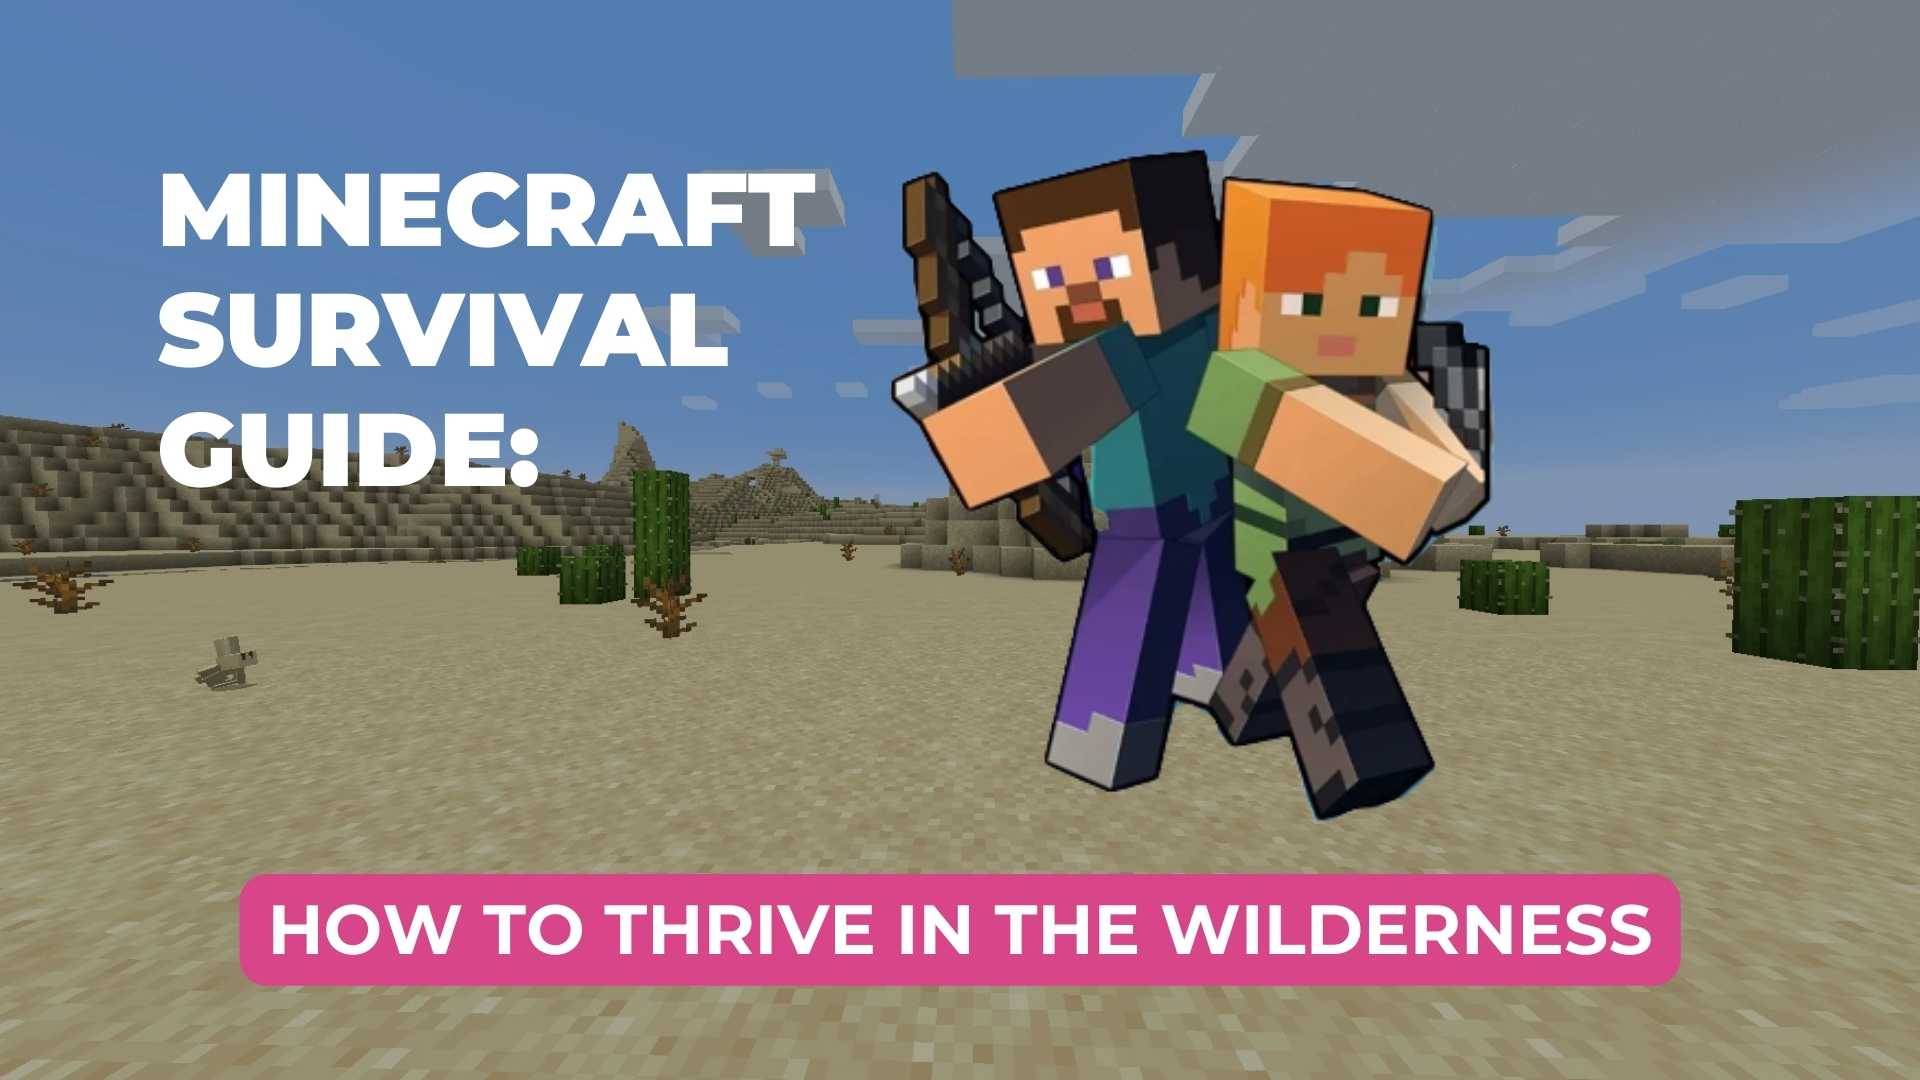 Minecraft guide to survival: how to thrive in the wilderness - Gamestate